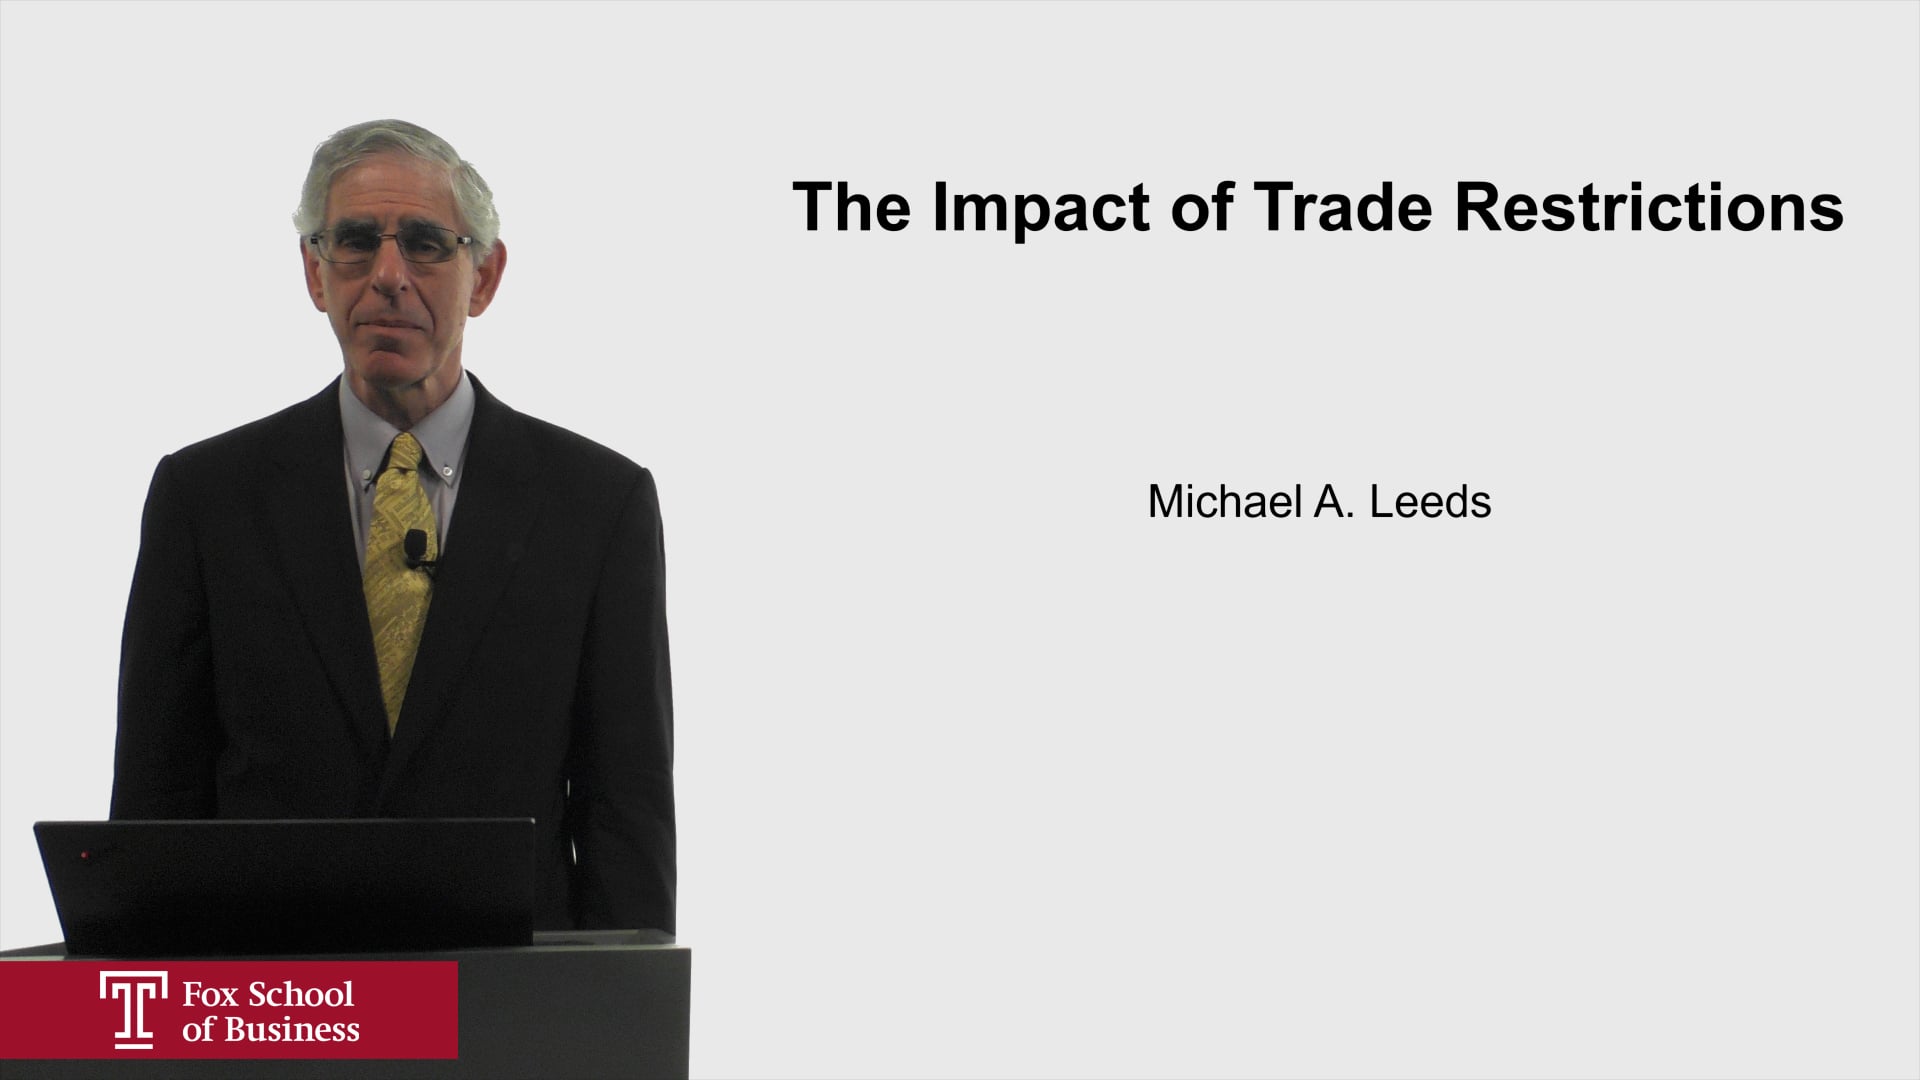 The Impact of Trade Restrictions